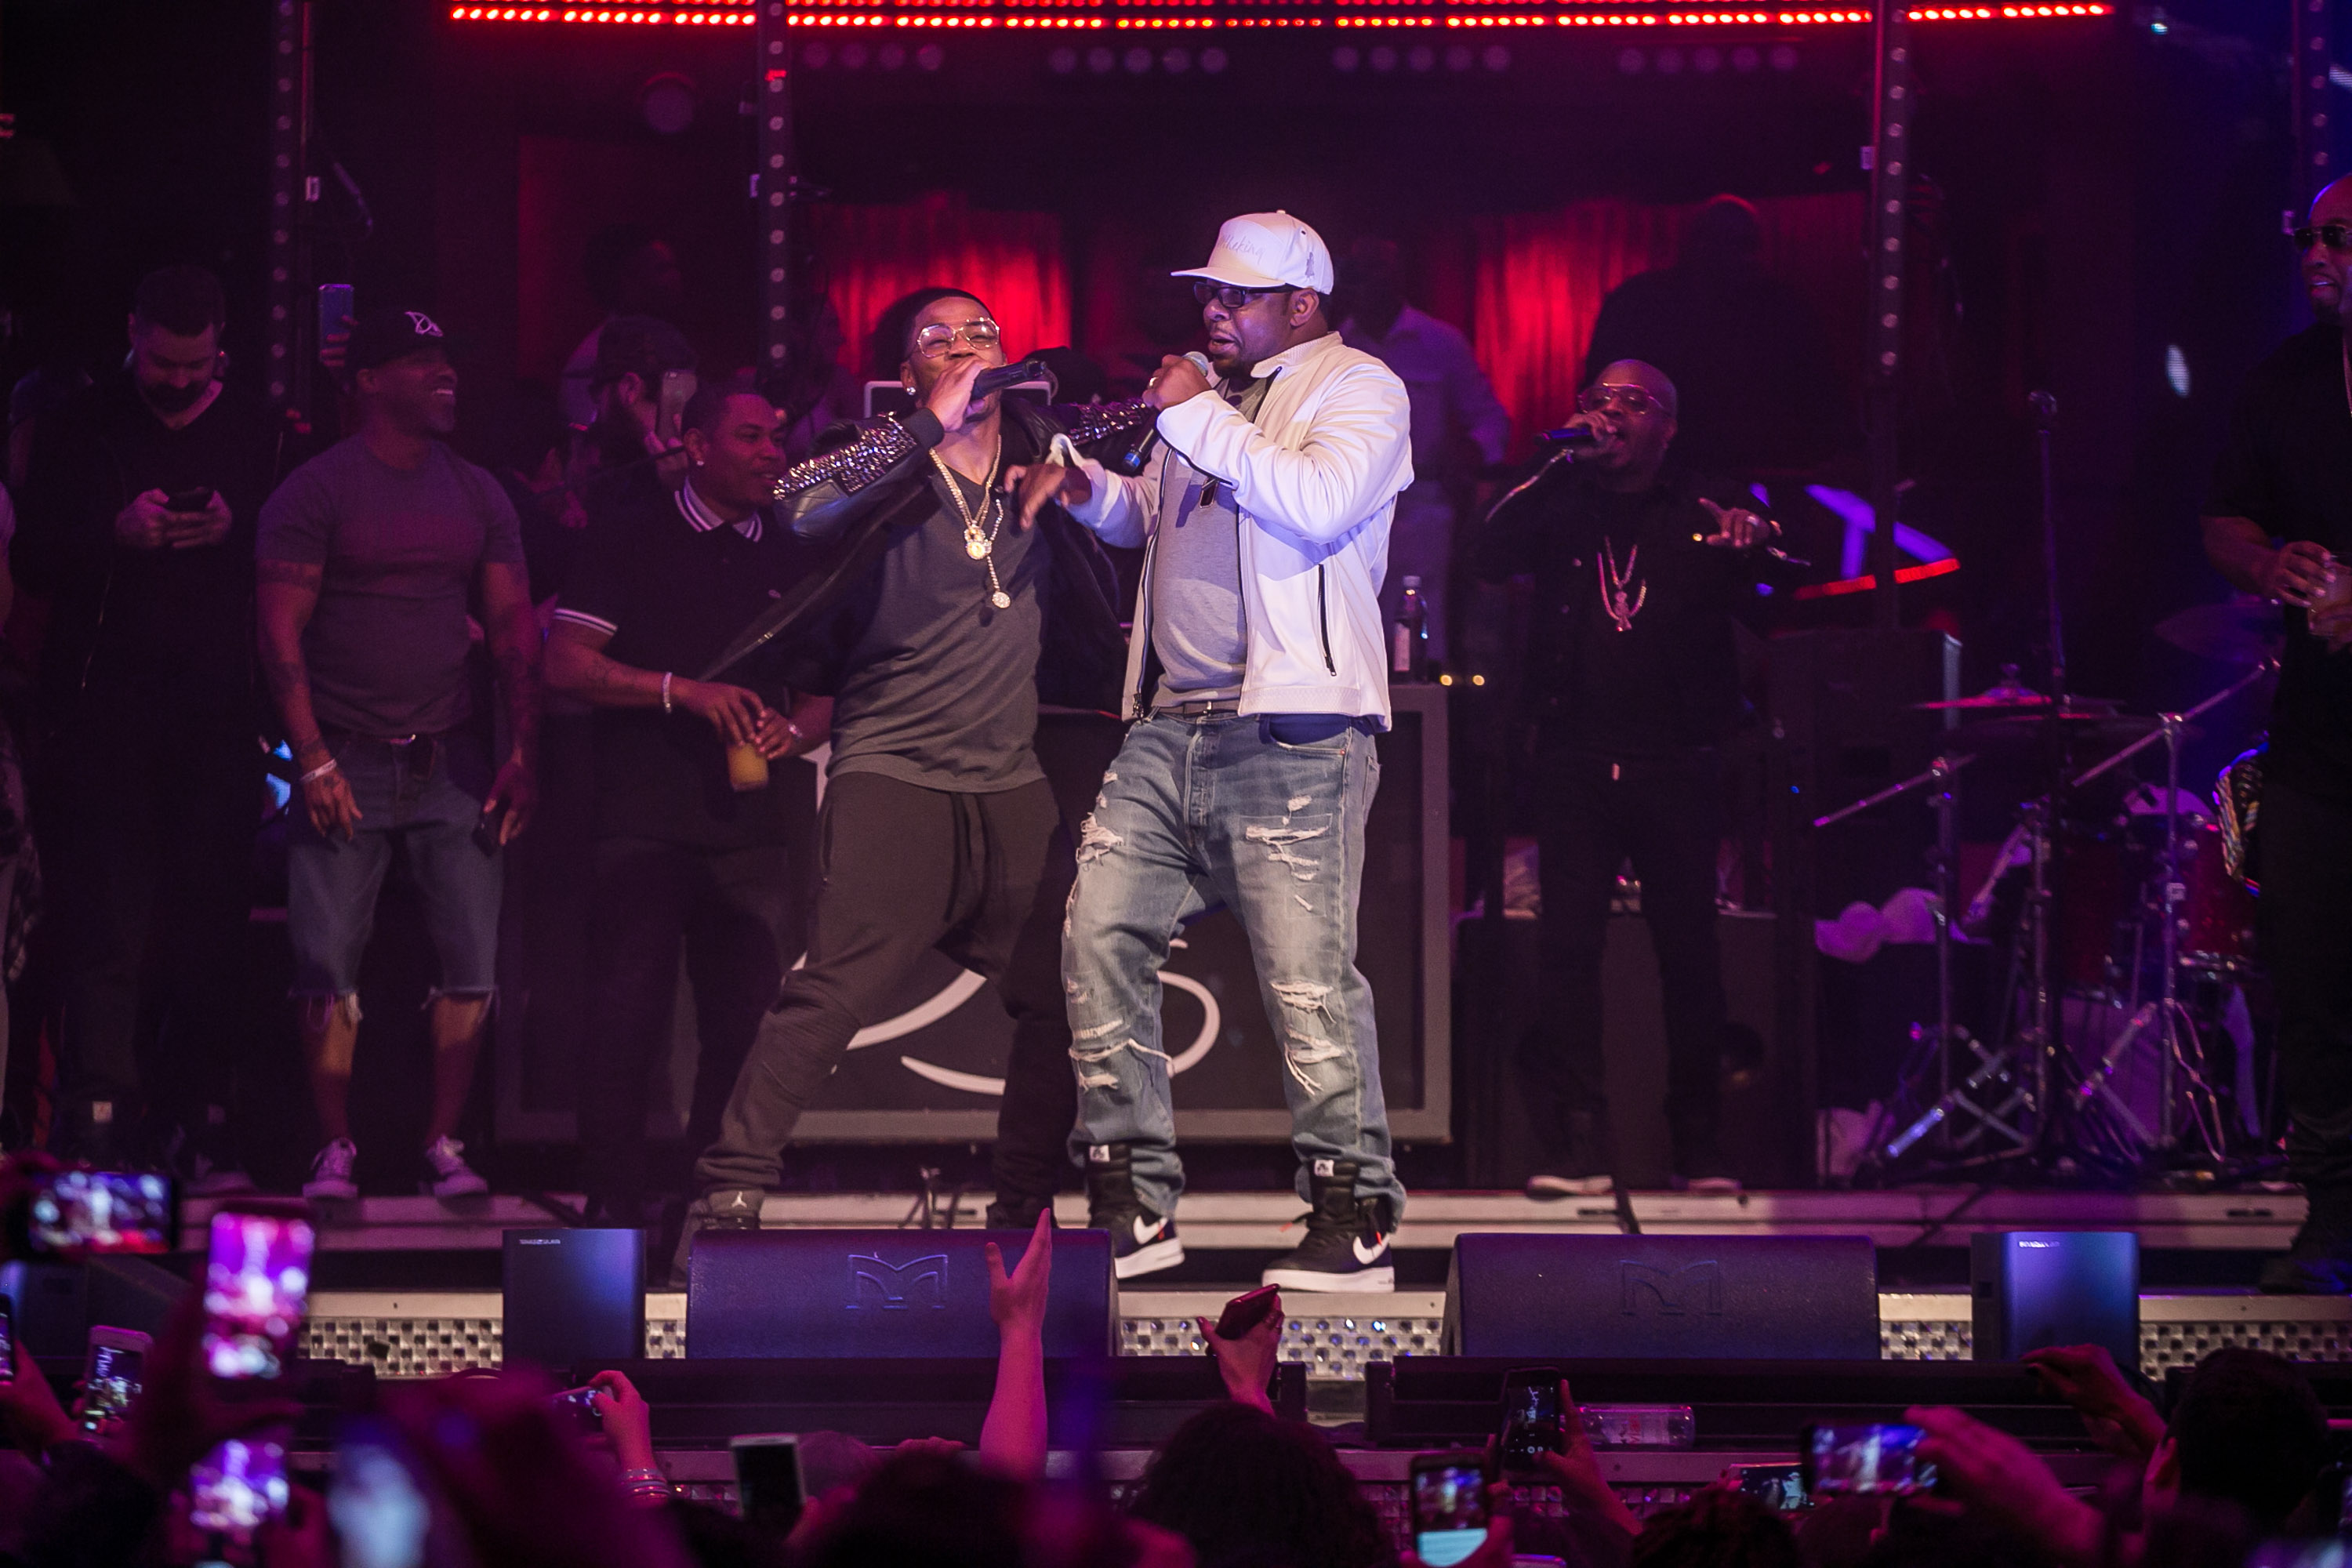 nelly-and-bobby-brown-at-drais-nightclub-las-vegas-11-4-16_2_credit-andrew-dangtony-tran-photography